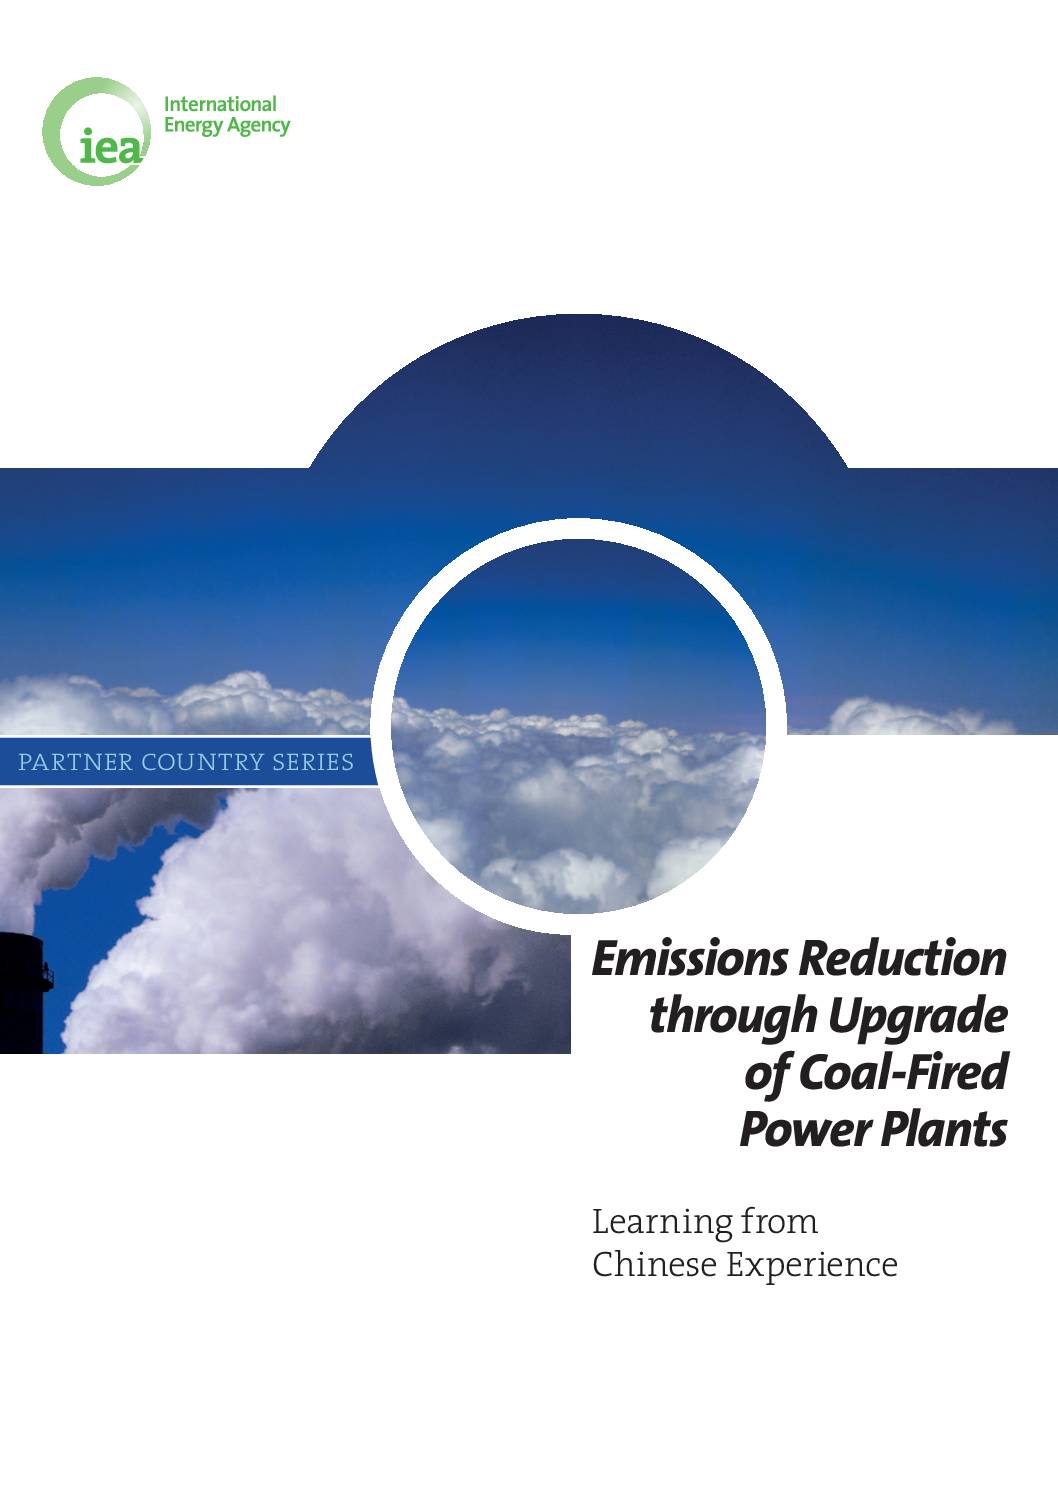 Partner Country Series – Emissions Reduction through Upgrade of Coal-Fired Power Plants